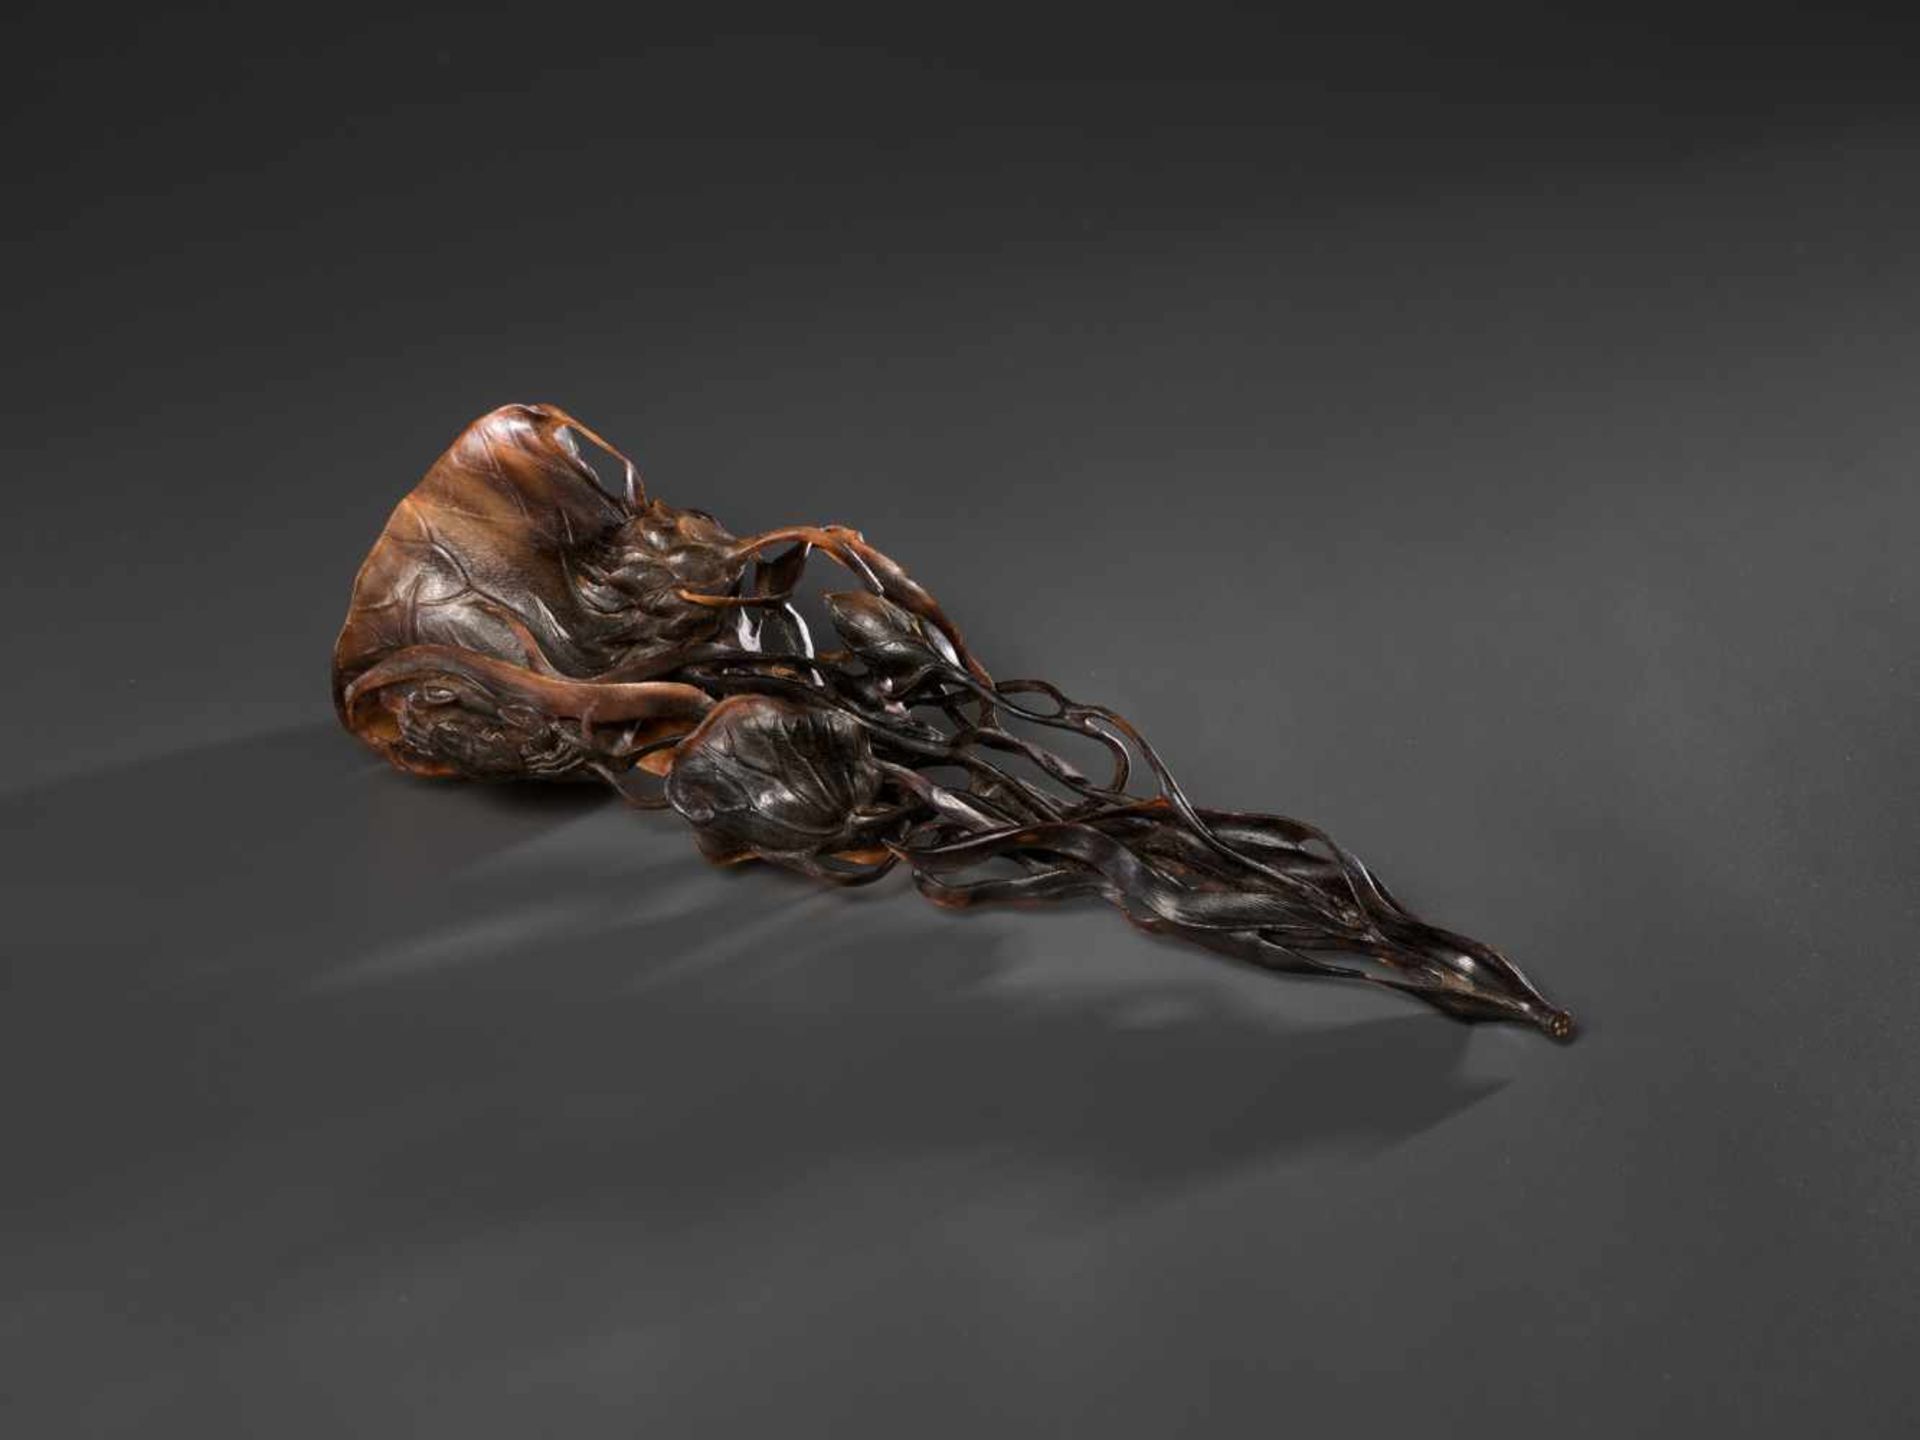 AN 18TH CENTURY RETICULATED FULL TIP RHINOCEROS ‘LOTUS’ CUP Rhinoceros horn in a deep brown to light